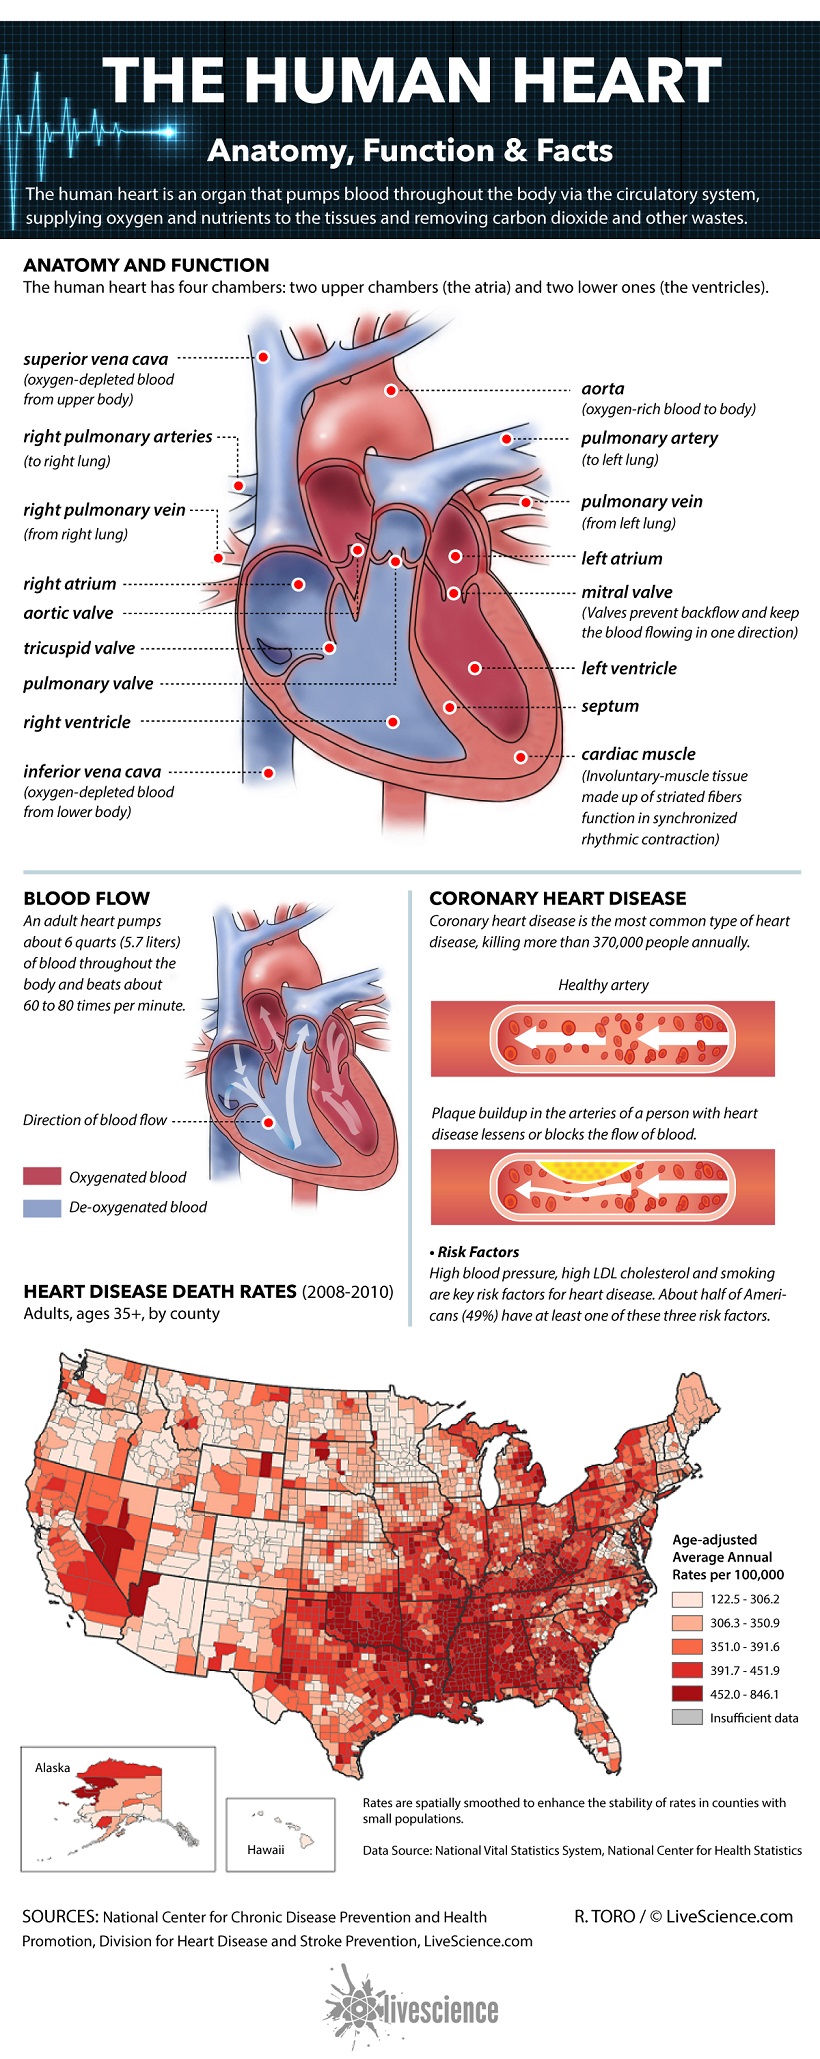 Anatomy, Function, and Facts Infographic